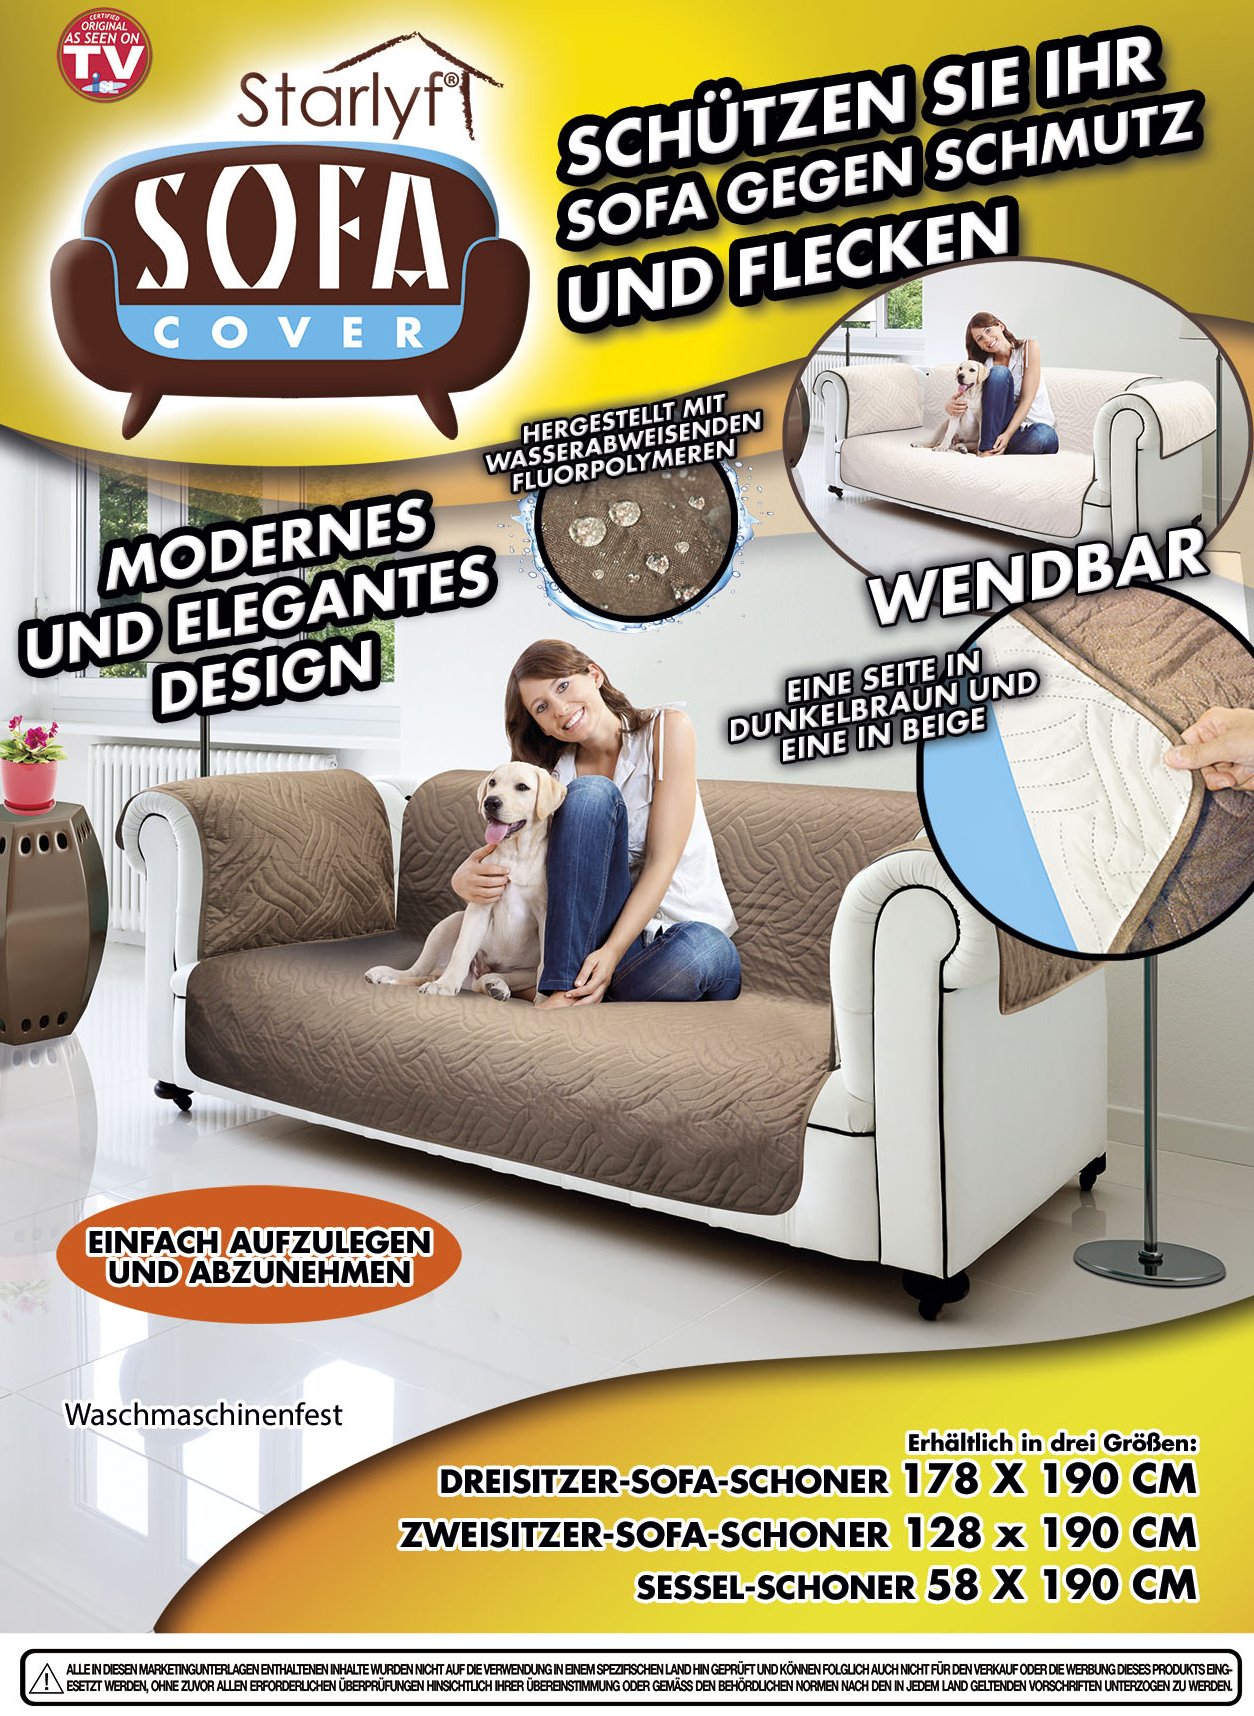 Sofa Cover Protection Against Dirt And Stains Brown For 1 Seater At Selva Online